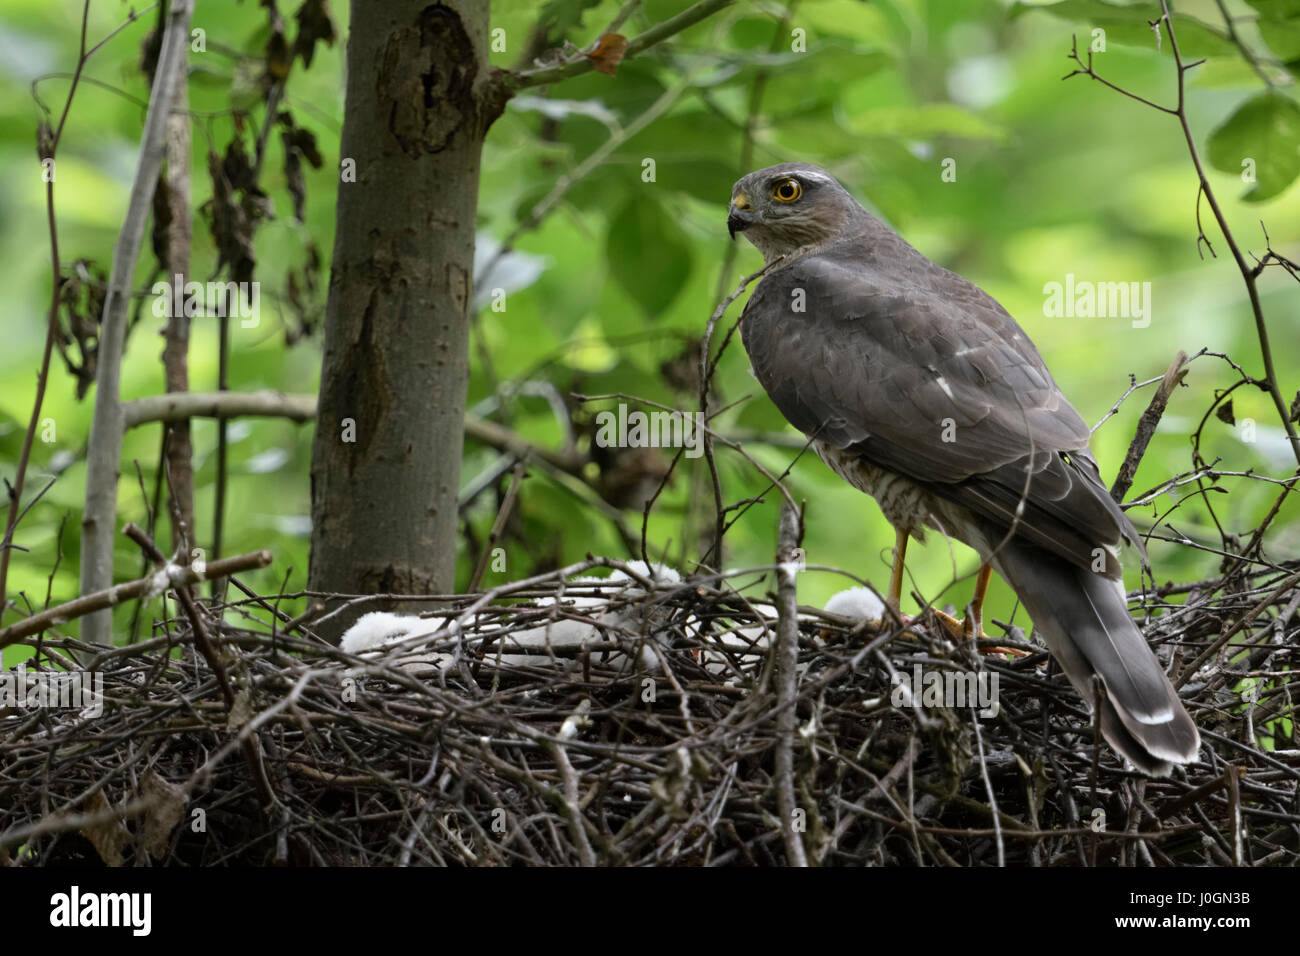 Sparrowhawk / Sperber ( Accipiter nisus ), female with chicks, standing on the edge of its nest, watching back over shoulder, backside view. Stock Photo